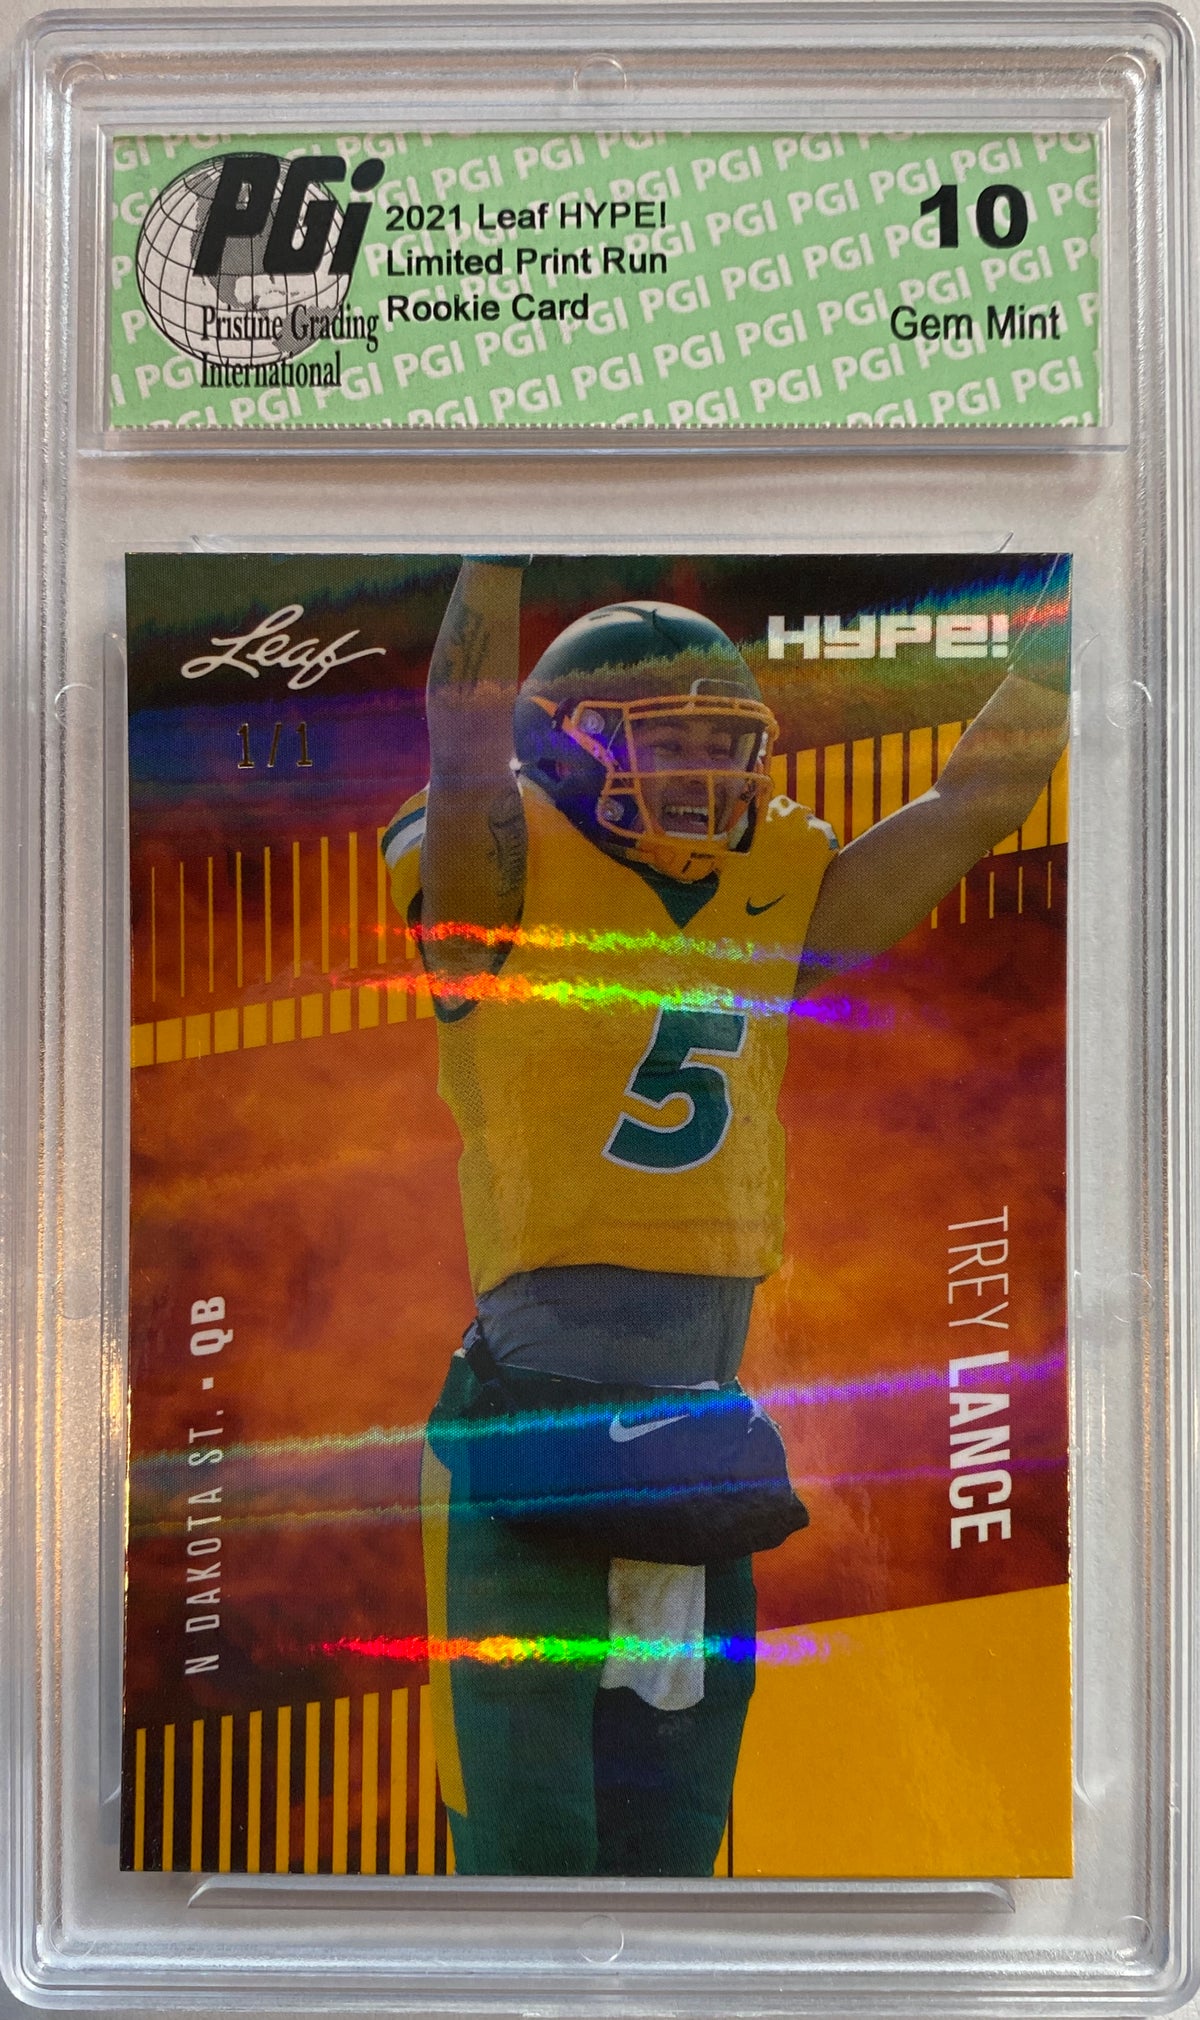 Trey Lance 2021 Leaf Hype 51a Gold Shimmer 1 Of 1 Rookie Card Pgi 1 — Rookie Cards 